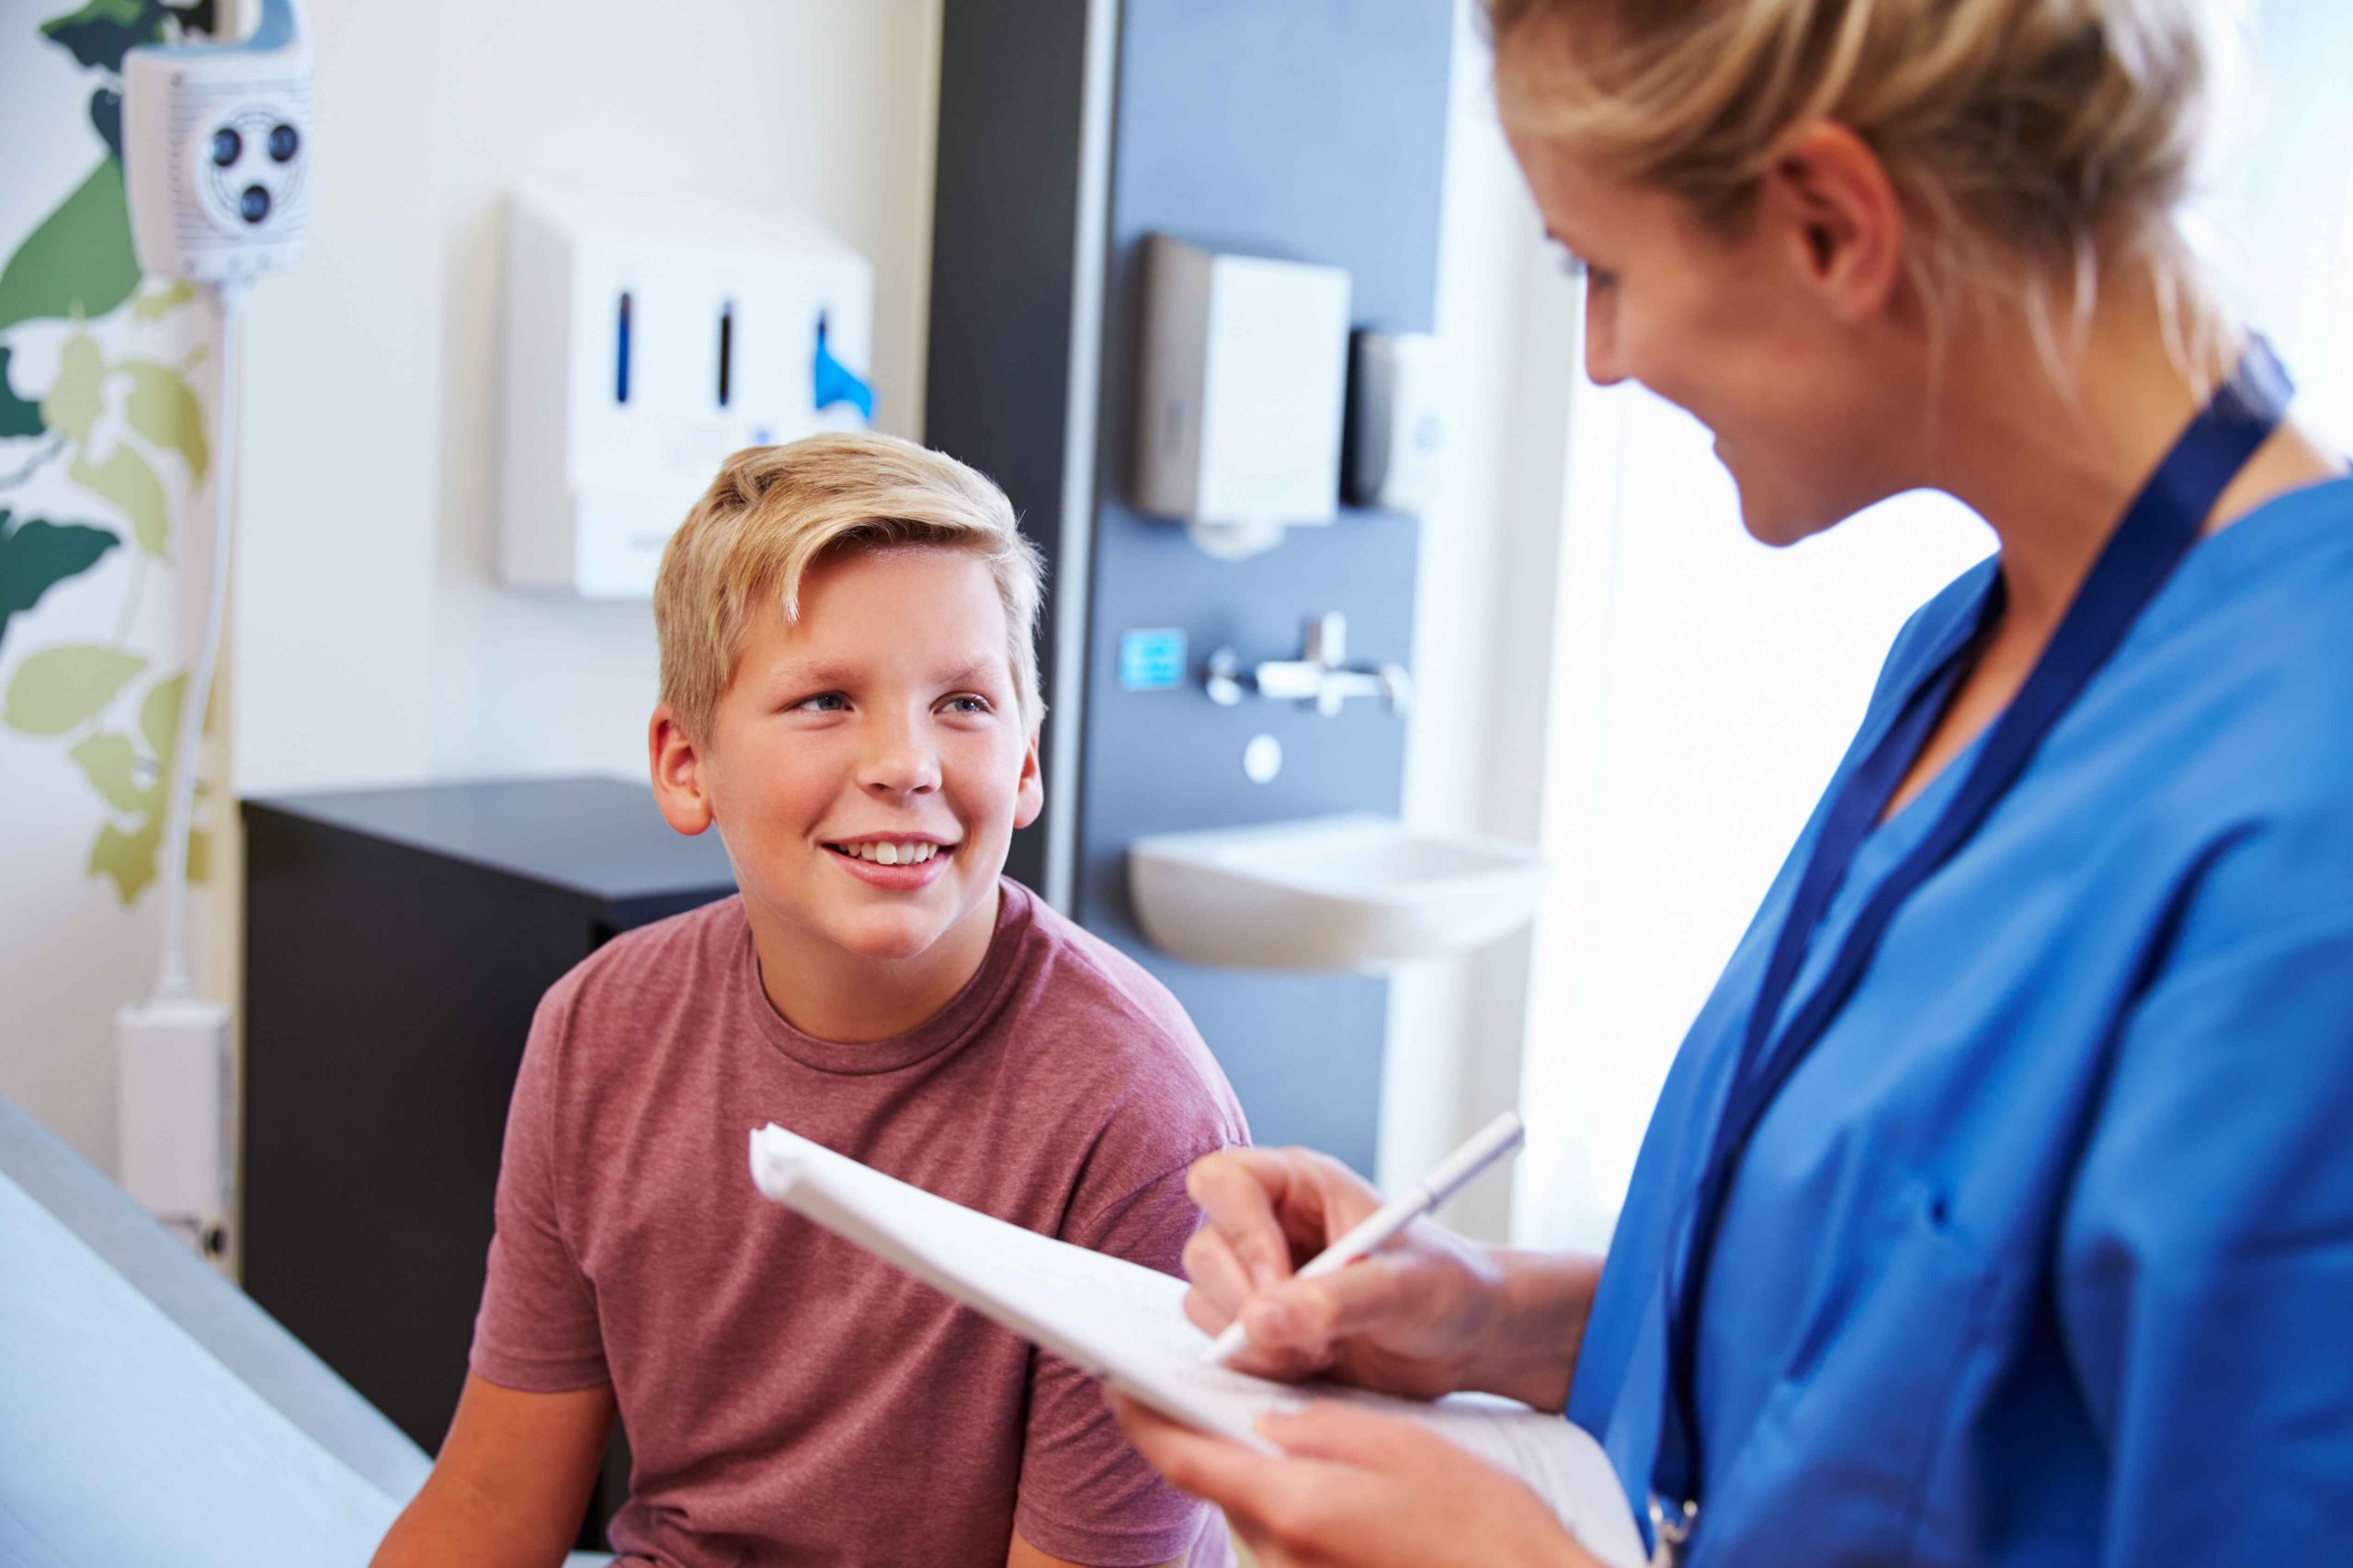 Sports Physical vs. Well Child Exam: What’s Needed? | MomDocs